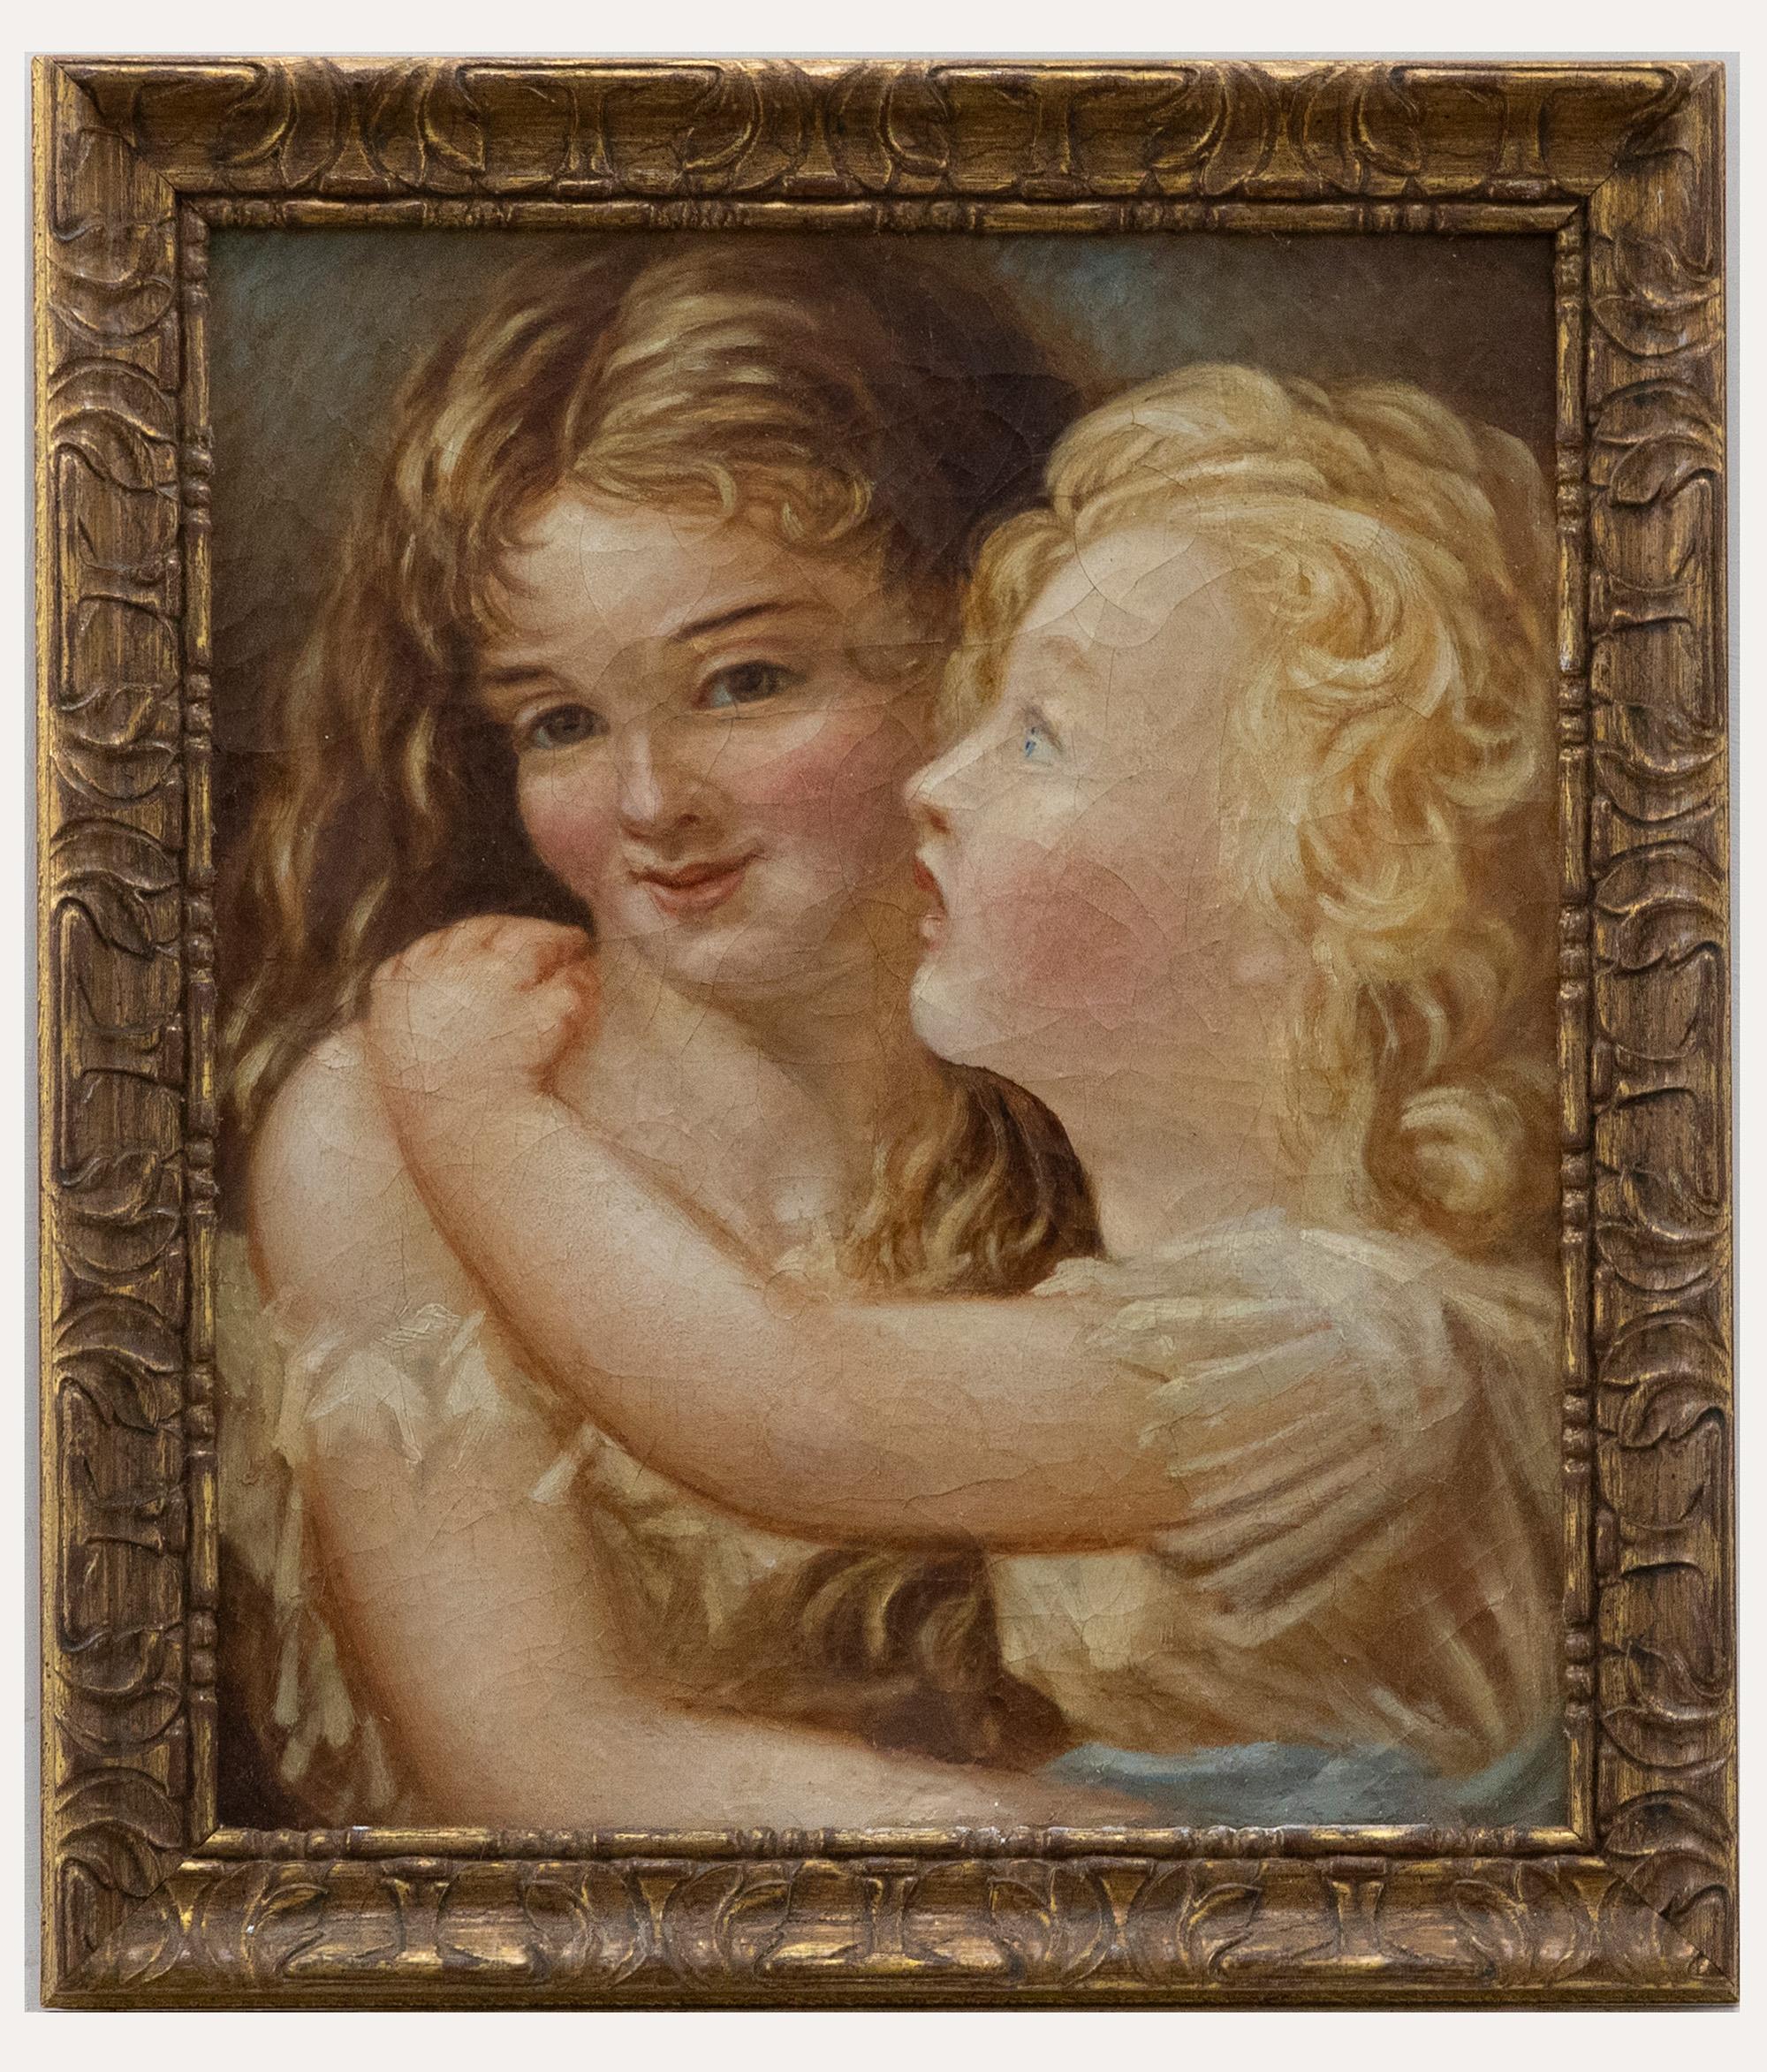 Unknown Portrait Painting - Framed Late 19th Century Oil - Two Sisters Embracing